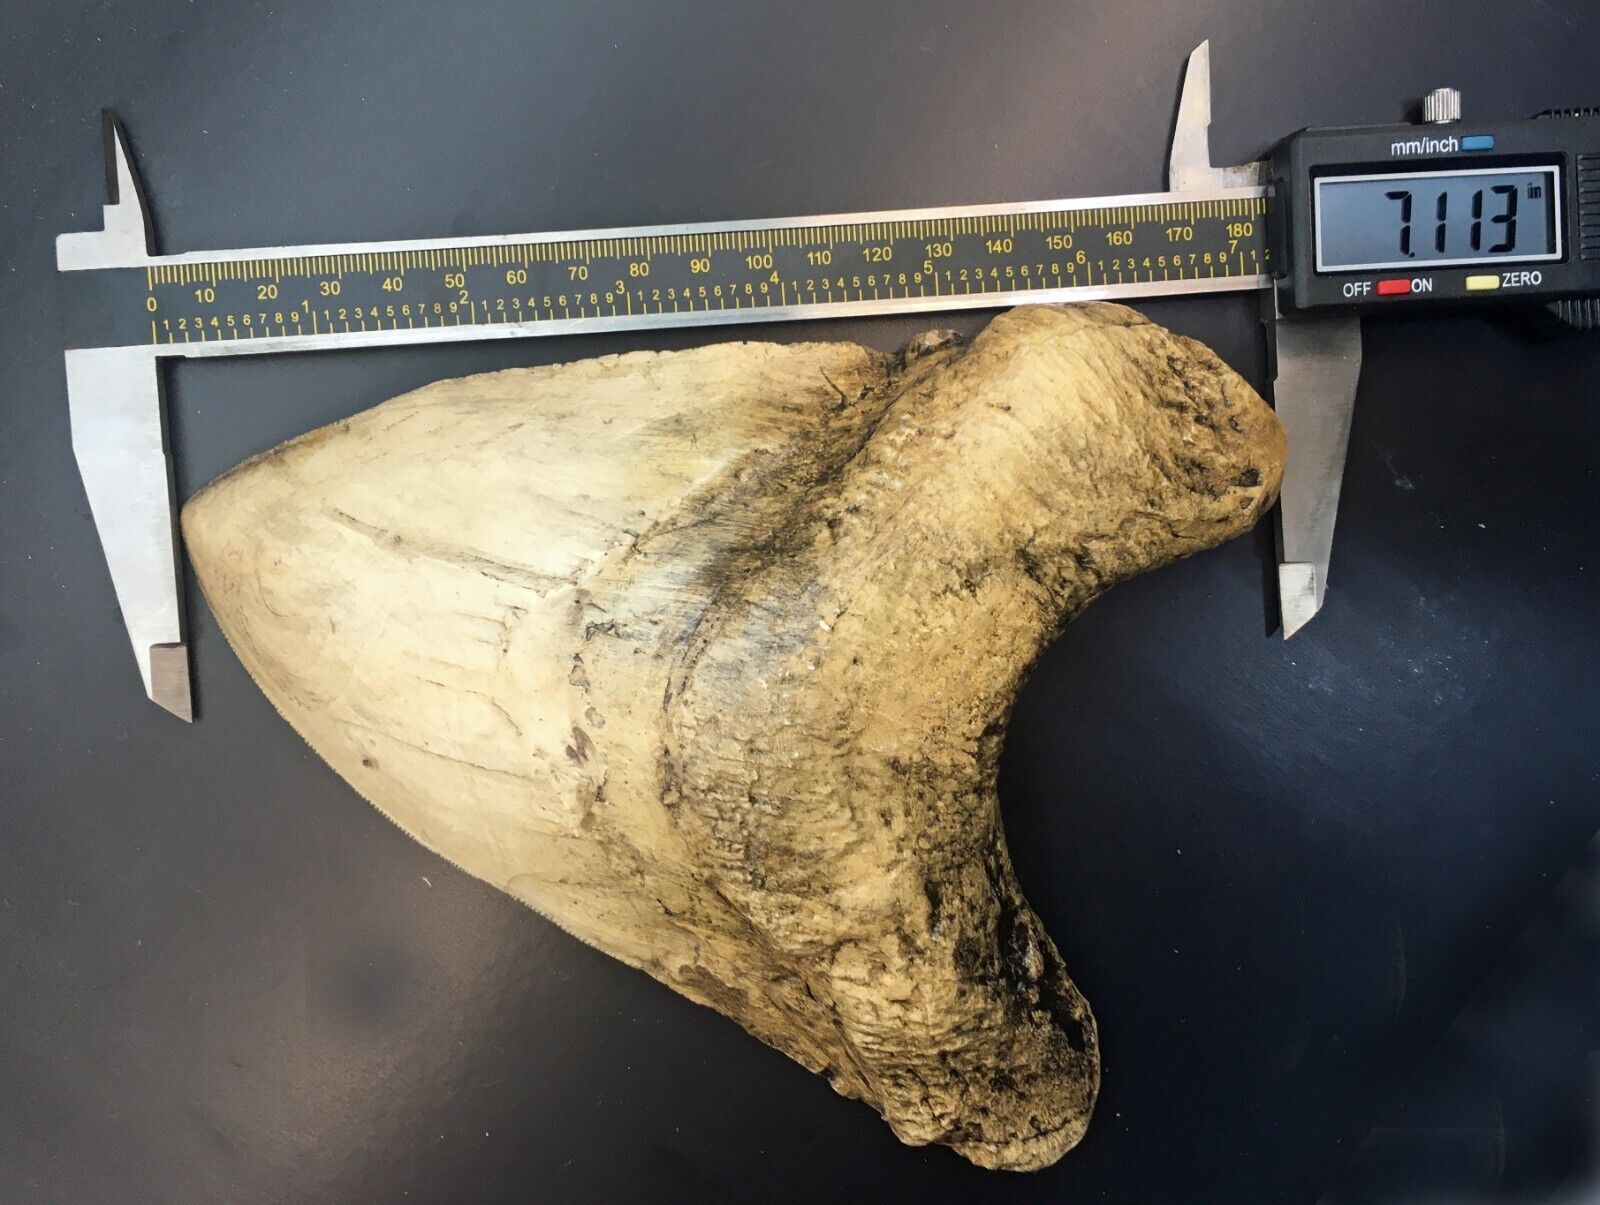 World Record Megalodon Shark Tooth Over 7 Inches (replica) #3050